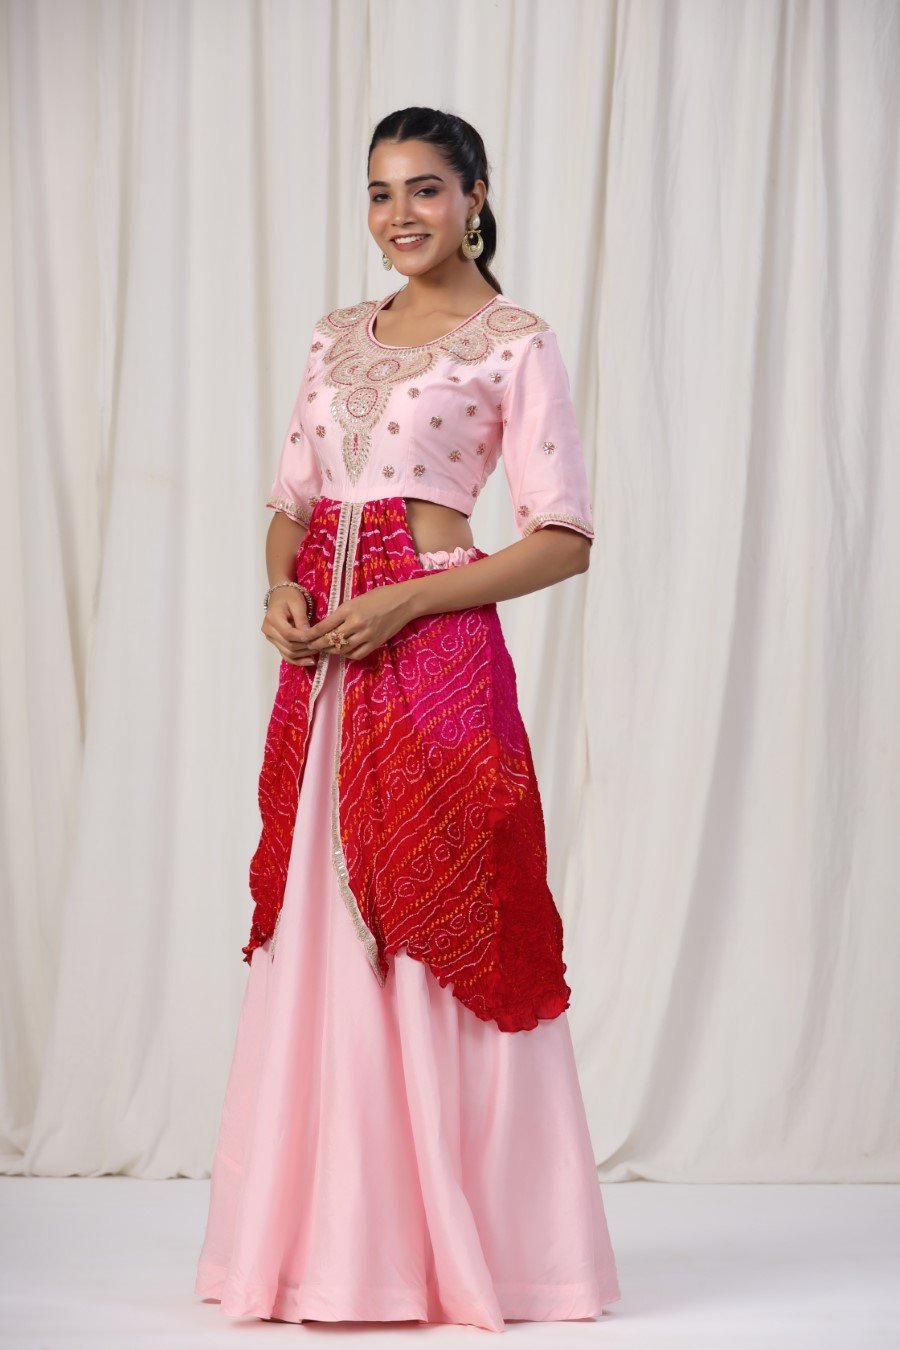 Pink Lotus Silk Embroidered Ethnic Draped Skirt Top